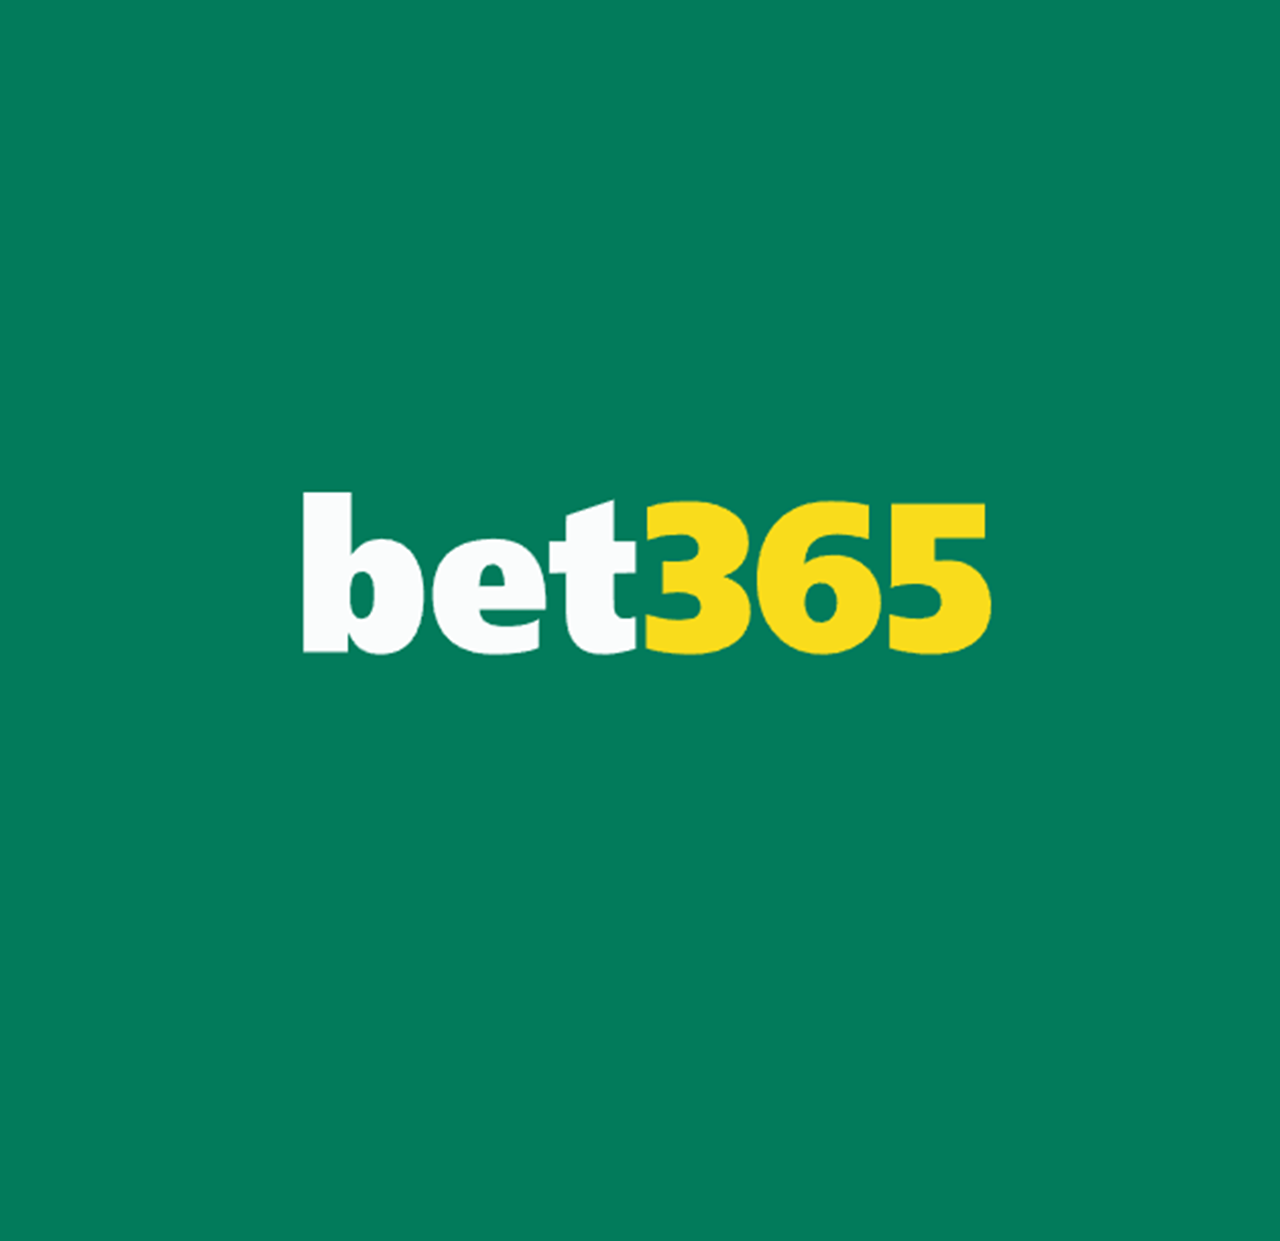 Bet365 must pay compensation to Danish soccer star Eriksen and others,  court finds